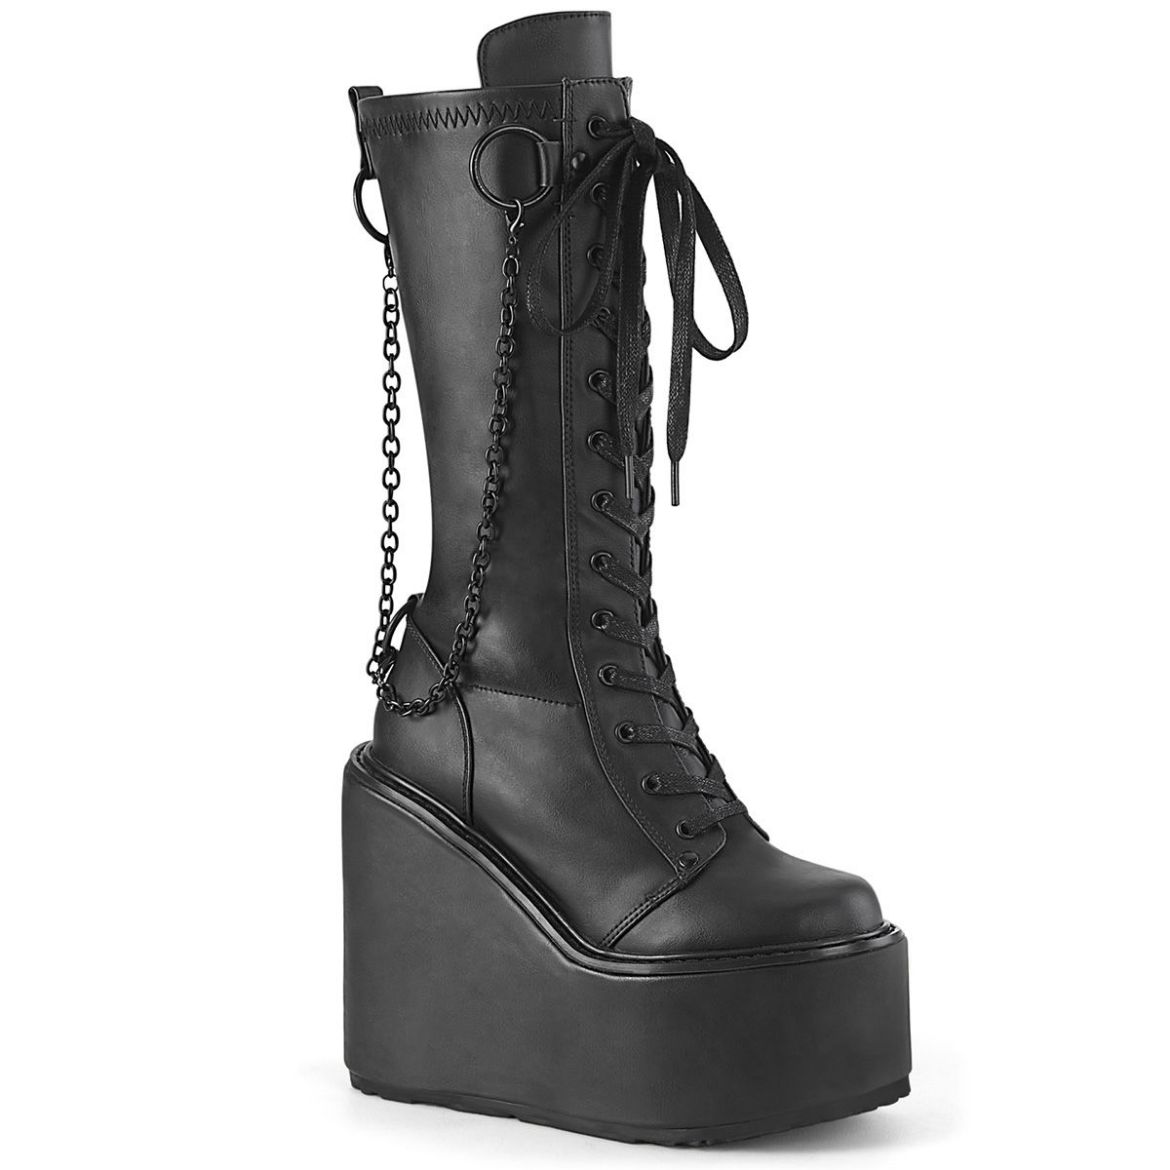 Image of Demonia SWING-150 Blk Stretch Vegan Leather 5 1/2 Inch PF Lace-Up Knee High Boot Side Zip